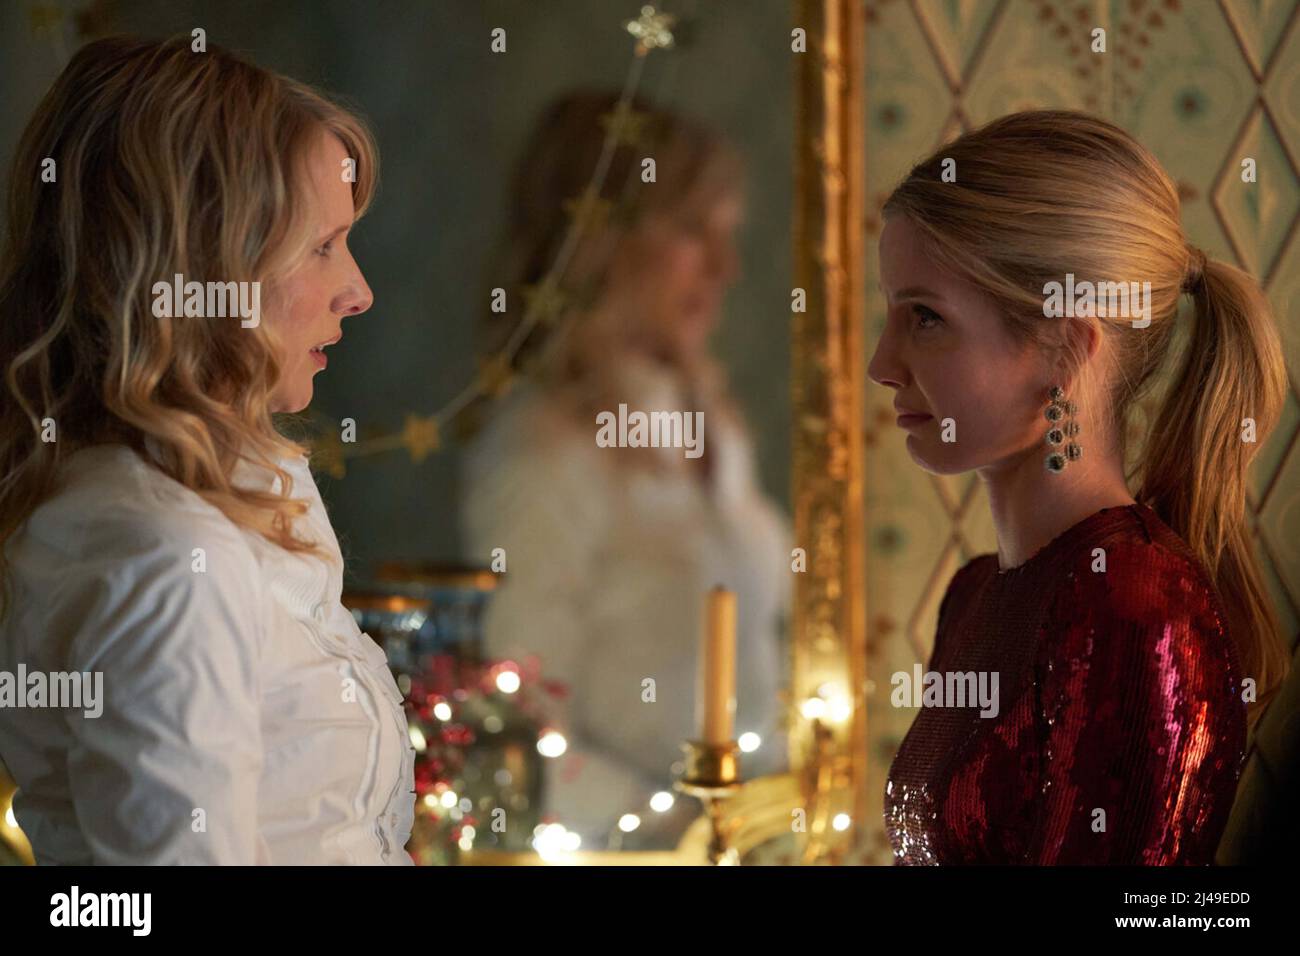 SILENT NIGHT (2021) LUCY PUNCH ANNABELLE WALLIS CAMILLE GRIFFIN (DIR) FILMS RLJE/COLLECTION MOVIESTORE Banque D'Images